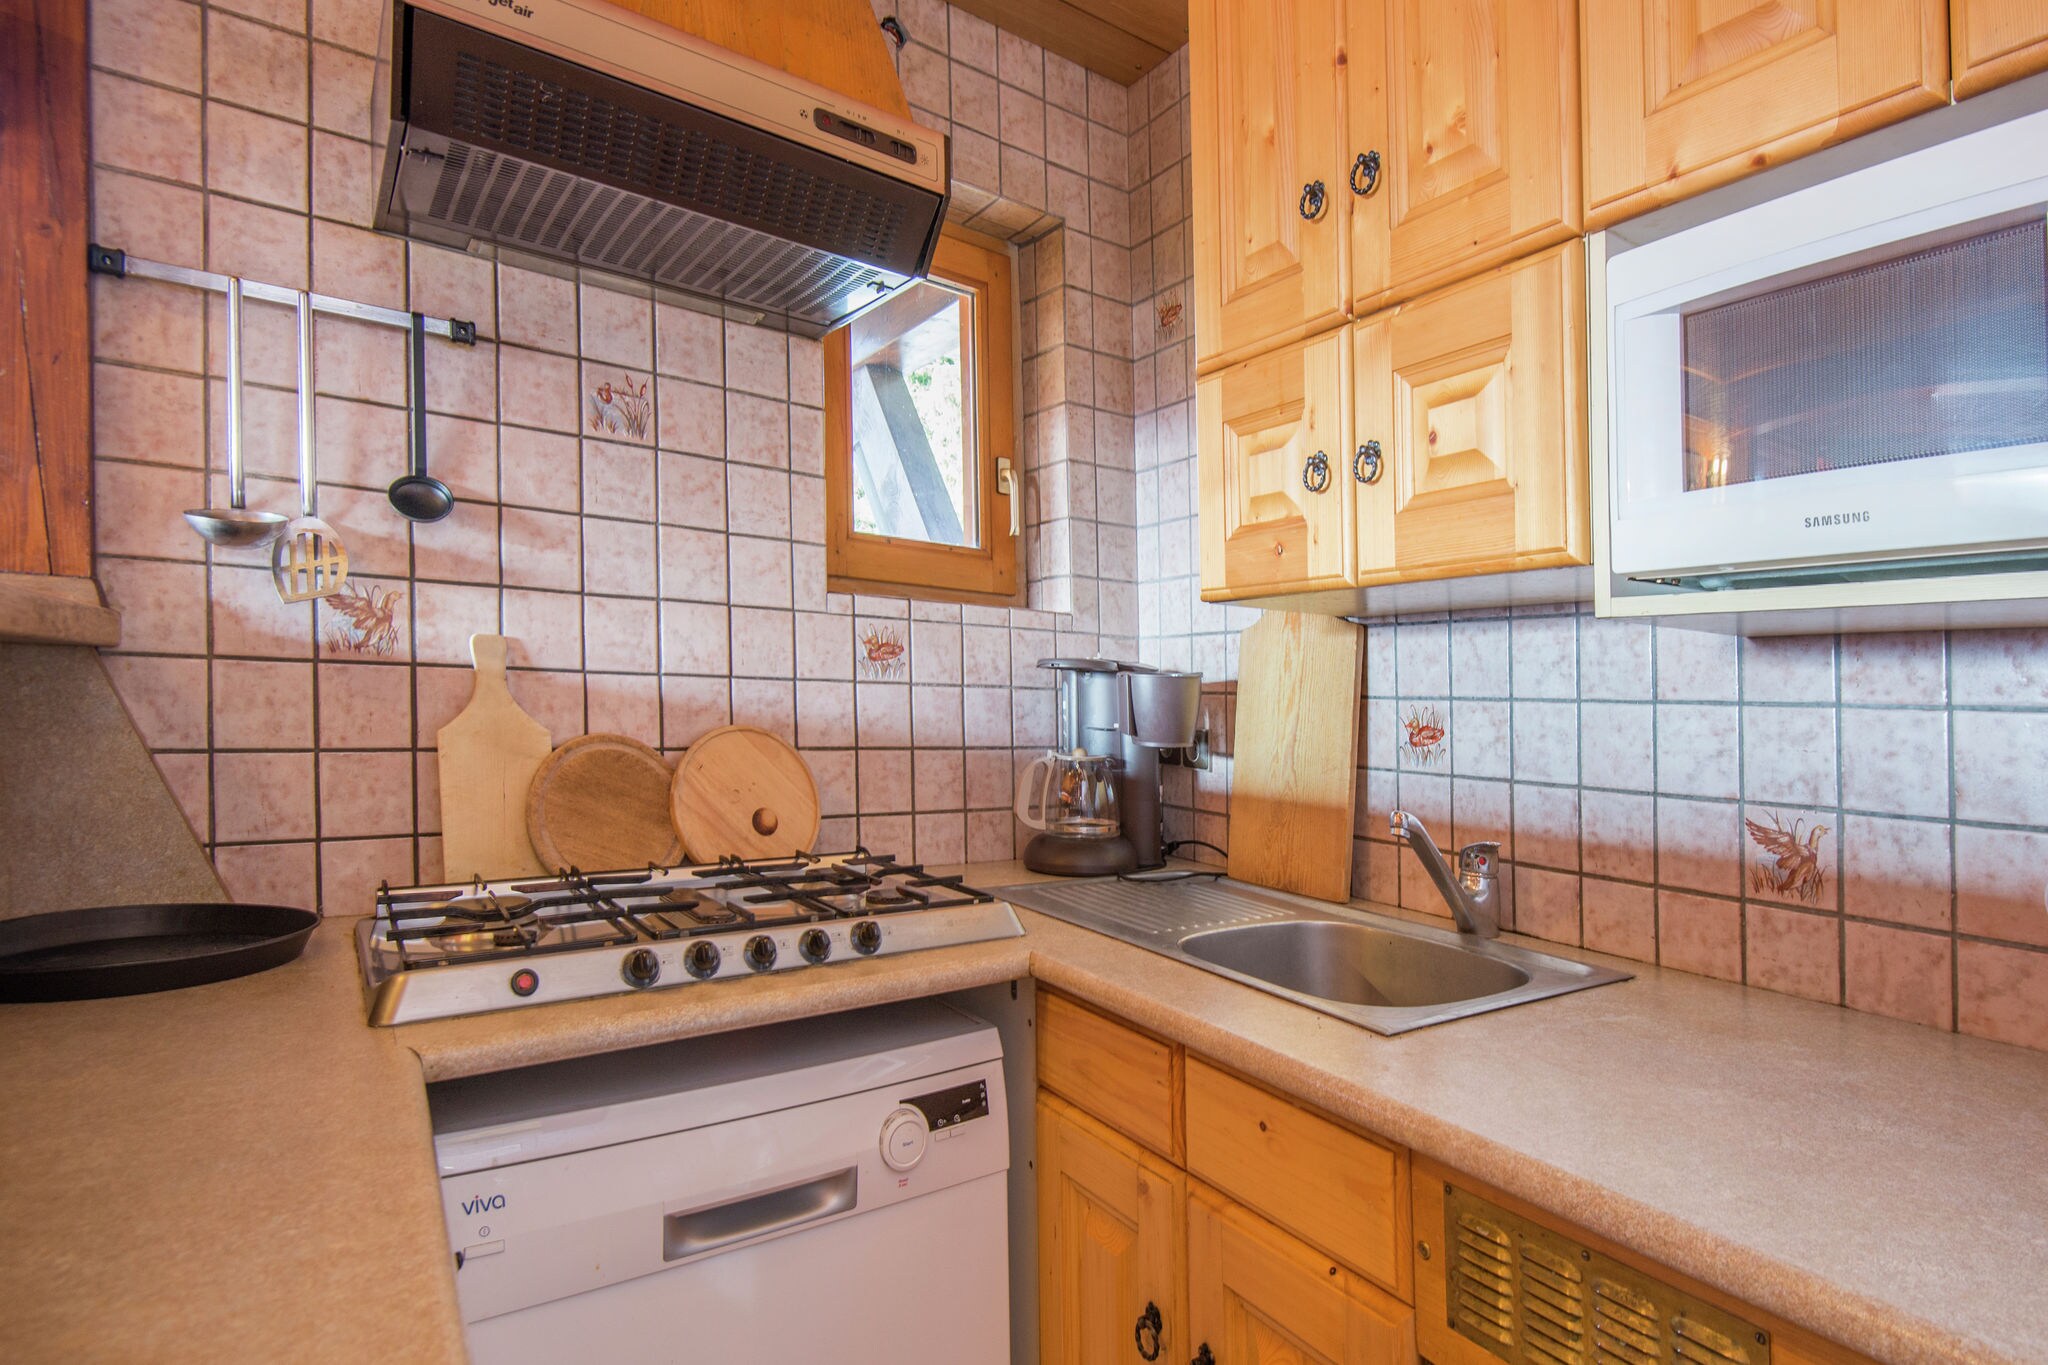 Rental for 14 people in beautiful ski area between mountains and nature